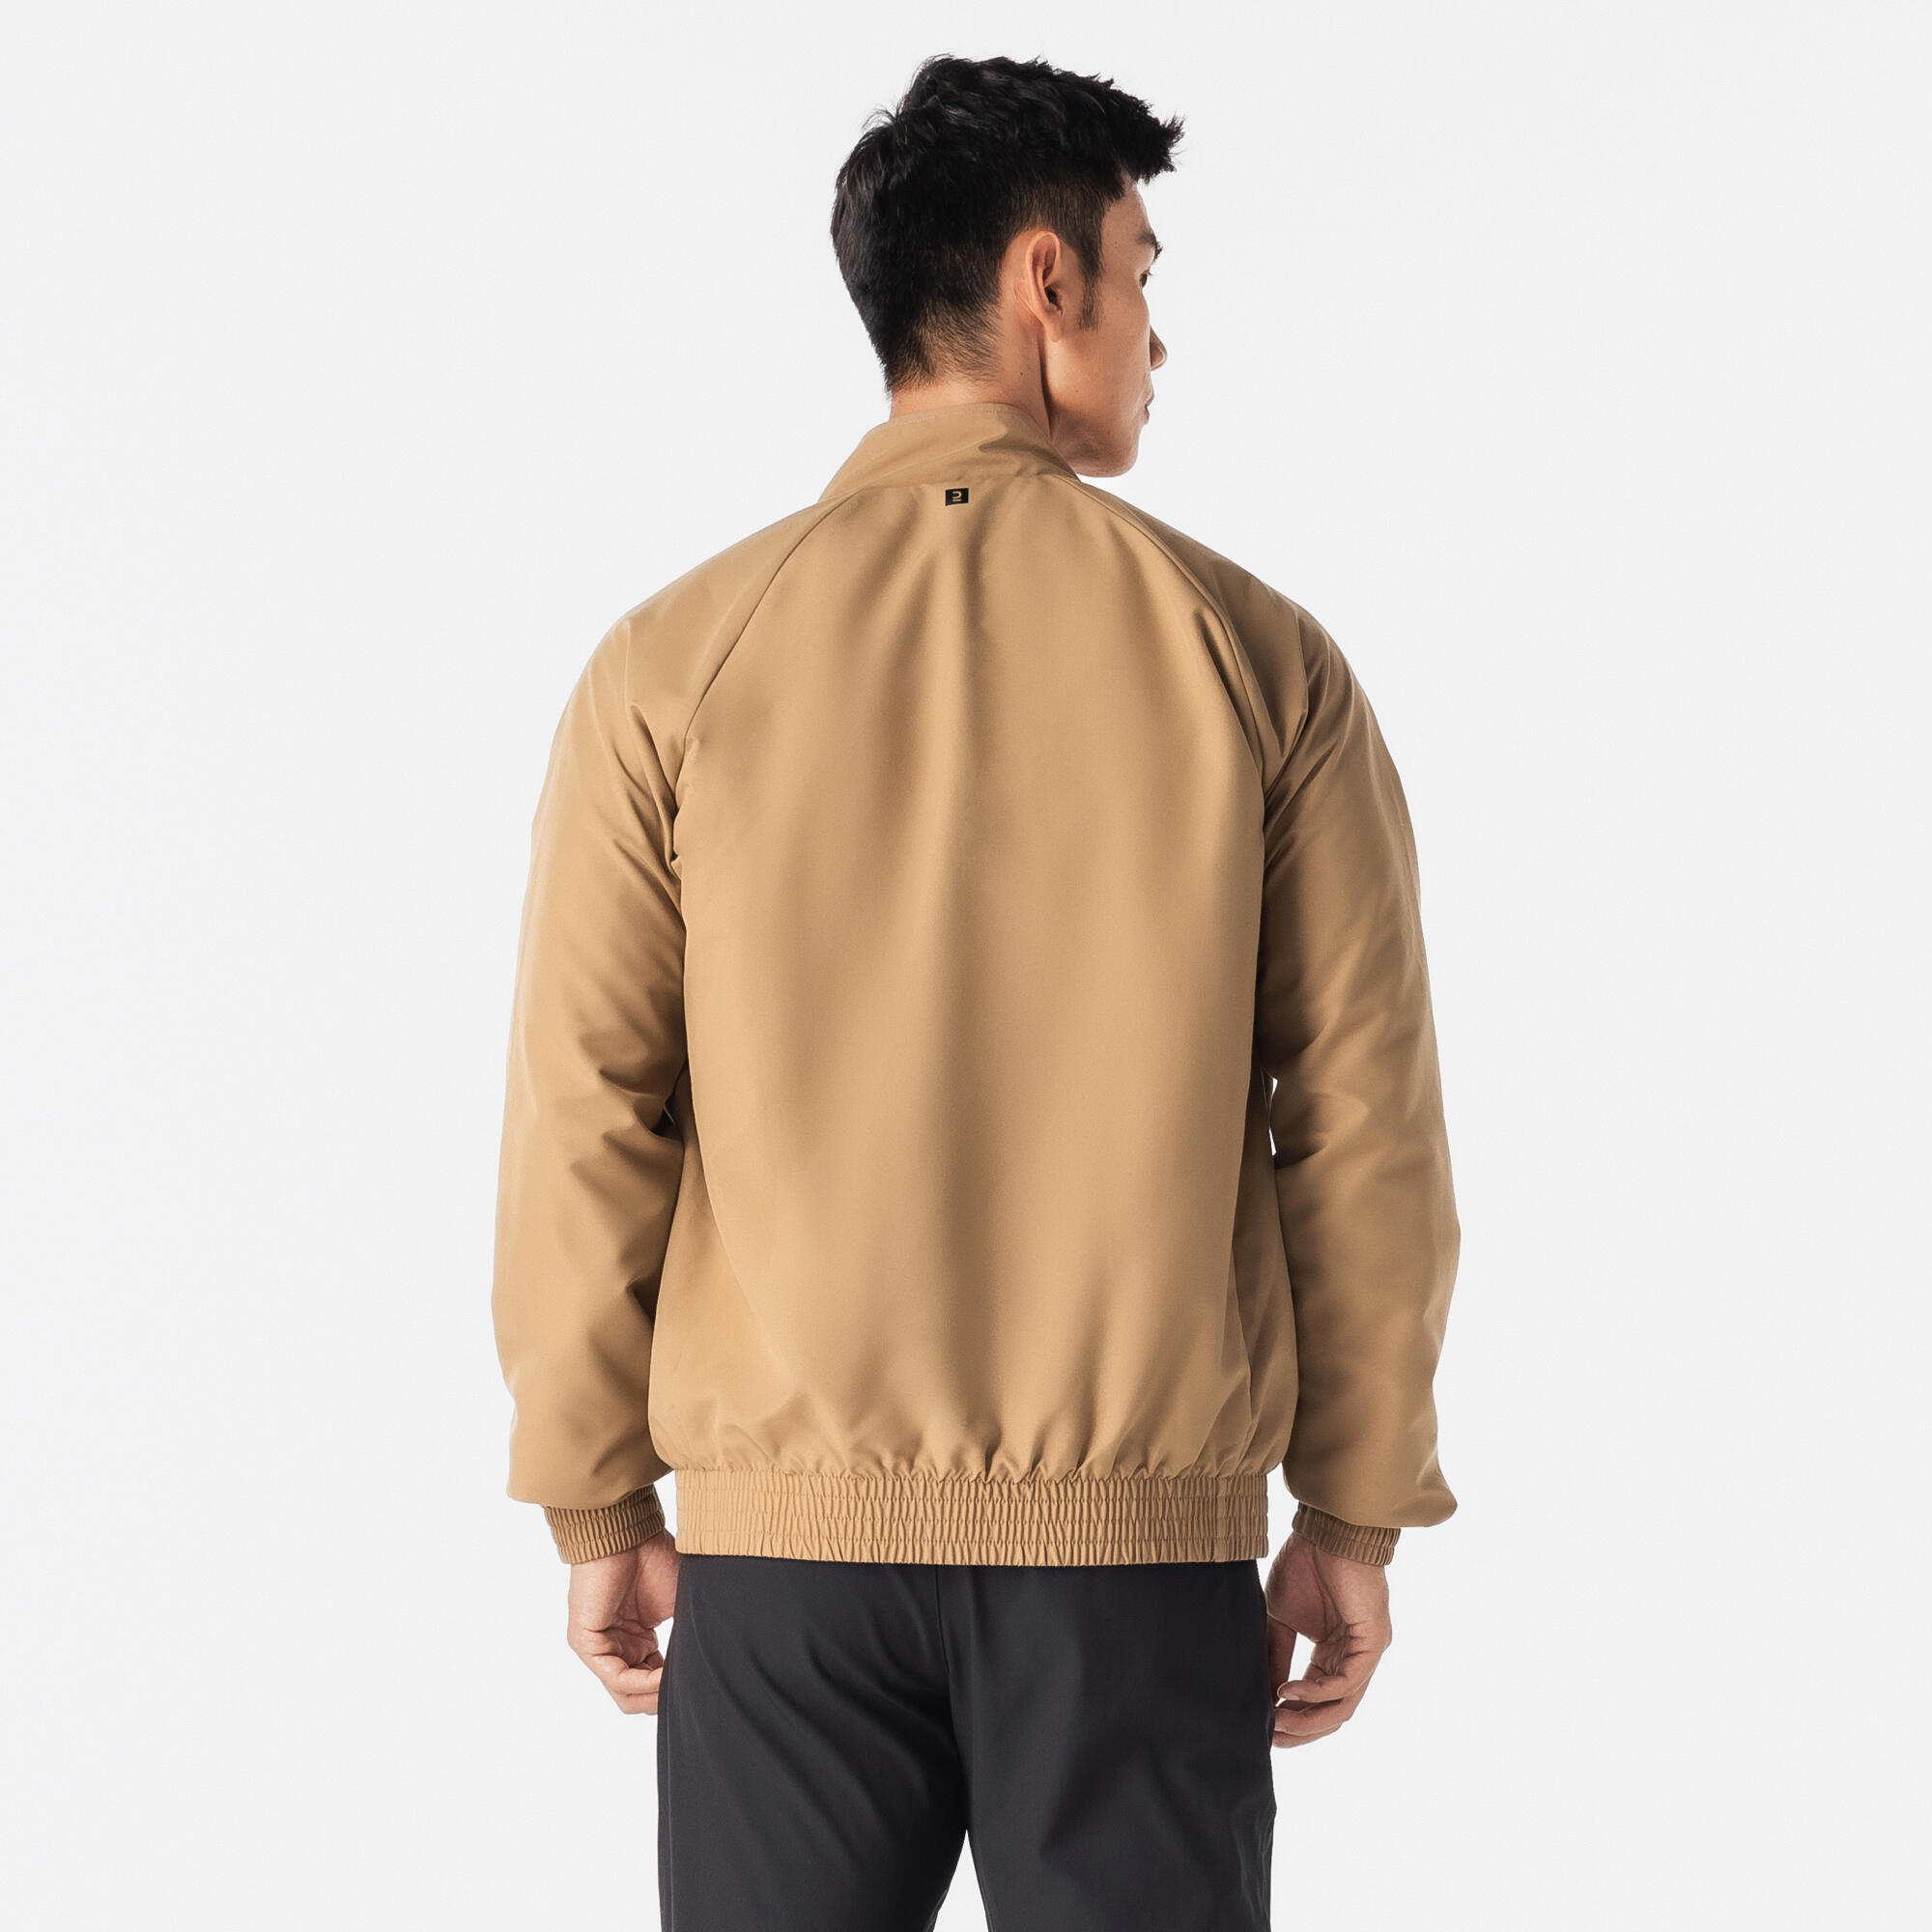 DOMYOS Men's Cardio Jacket By Decathlon - Buy DOMYOS Men's Cardio Jacket By  Decathlon Online at Best Prices in India on Snapdeal